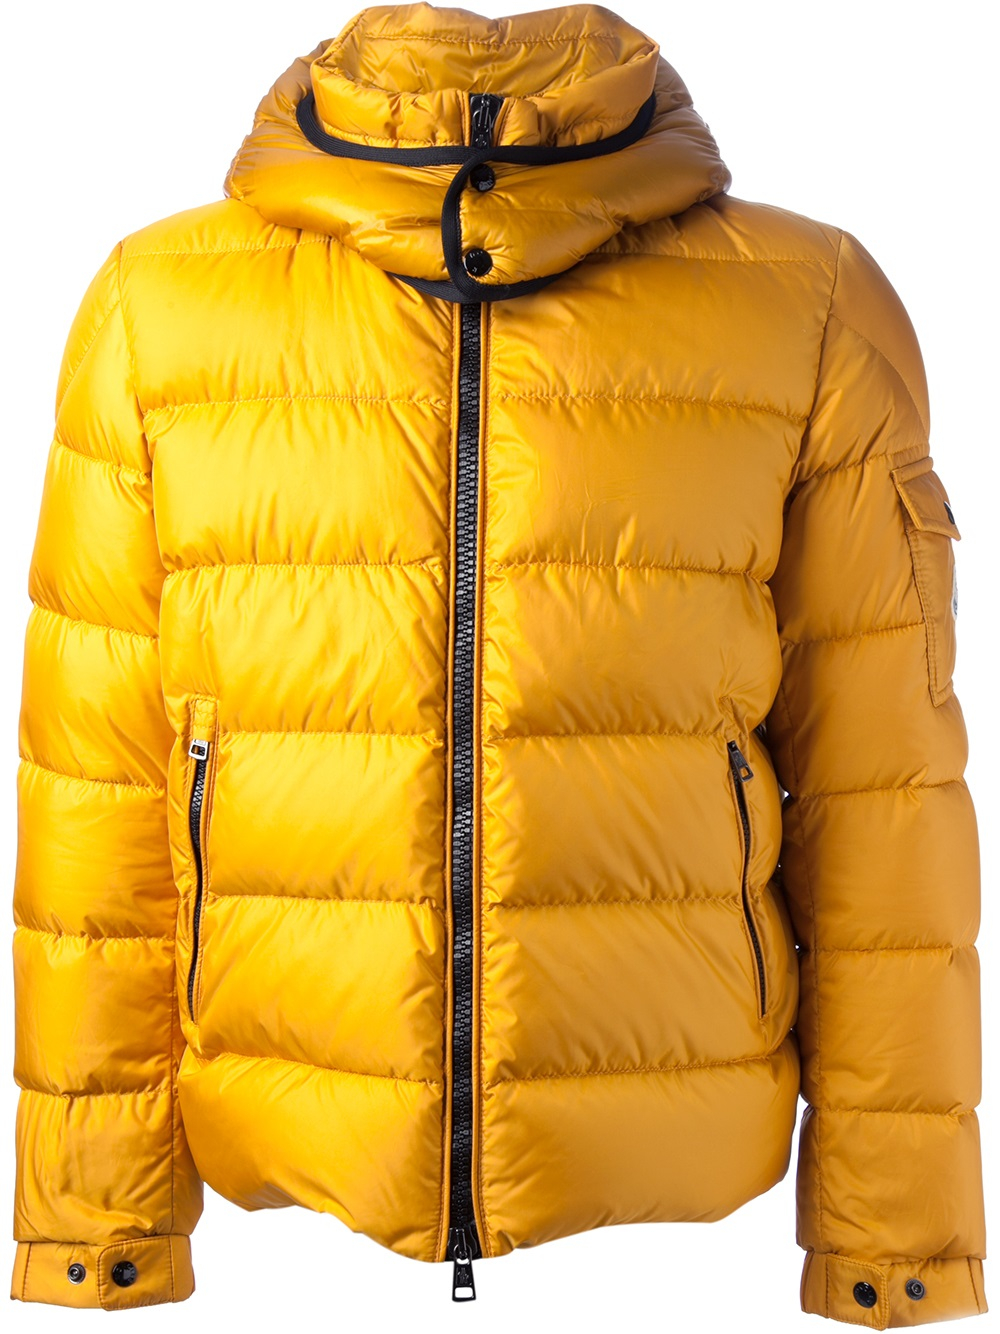 Moncler Hymalay Padded Jacket in Yellow & Orange (Yellow) for Men - Lyst